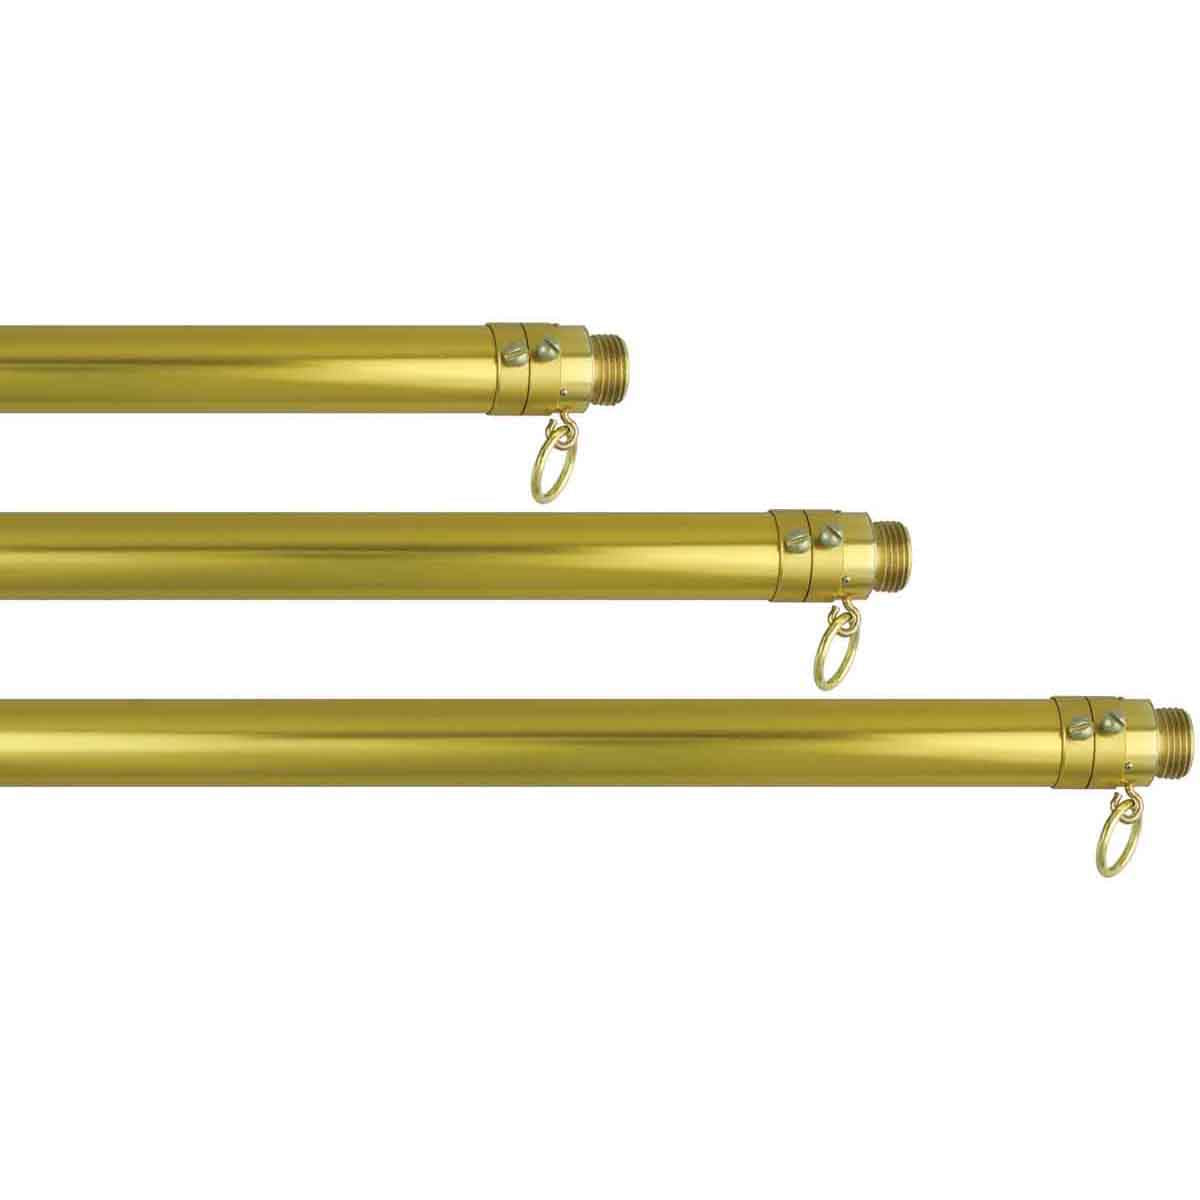 Adjustable Aluminum Flagpole, adjusts to any height between 6' and 10', available in shiny gold anozided finish